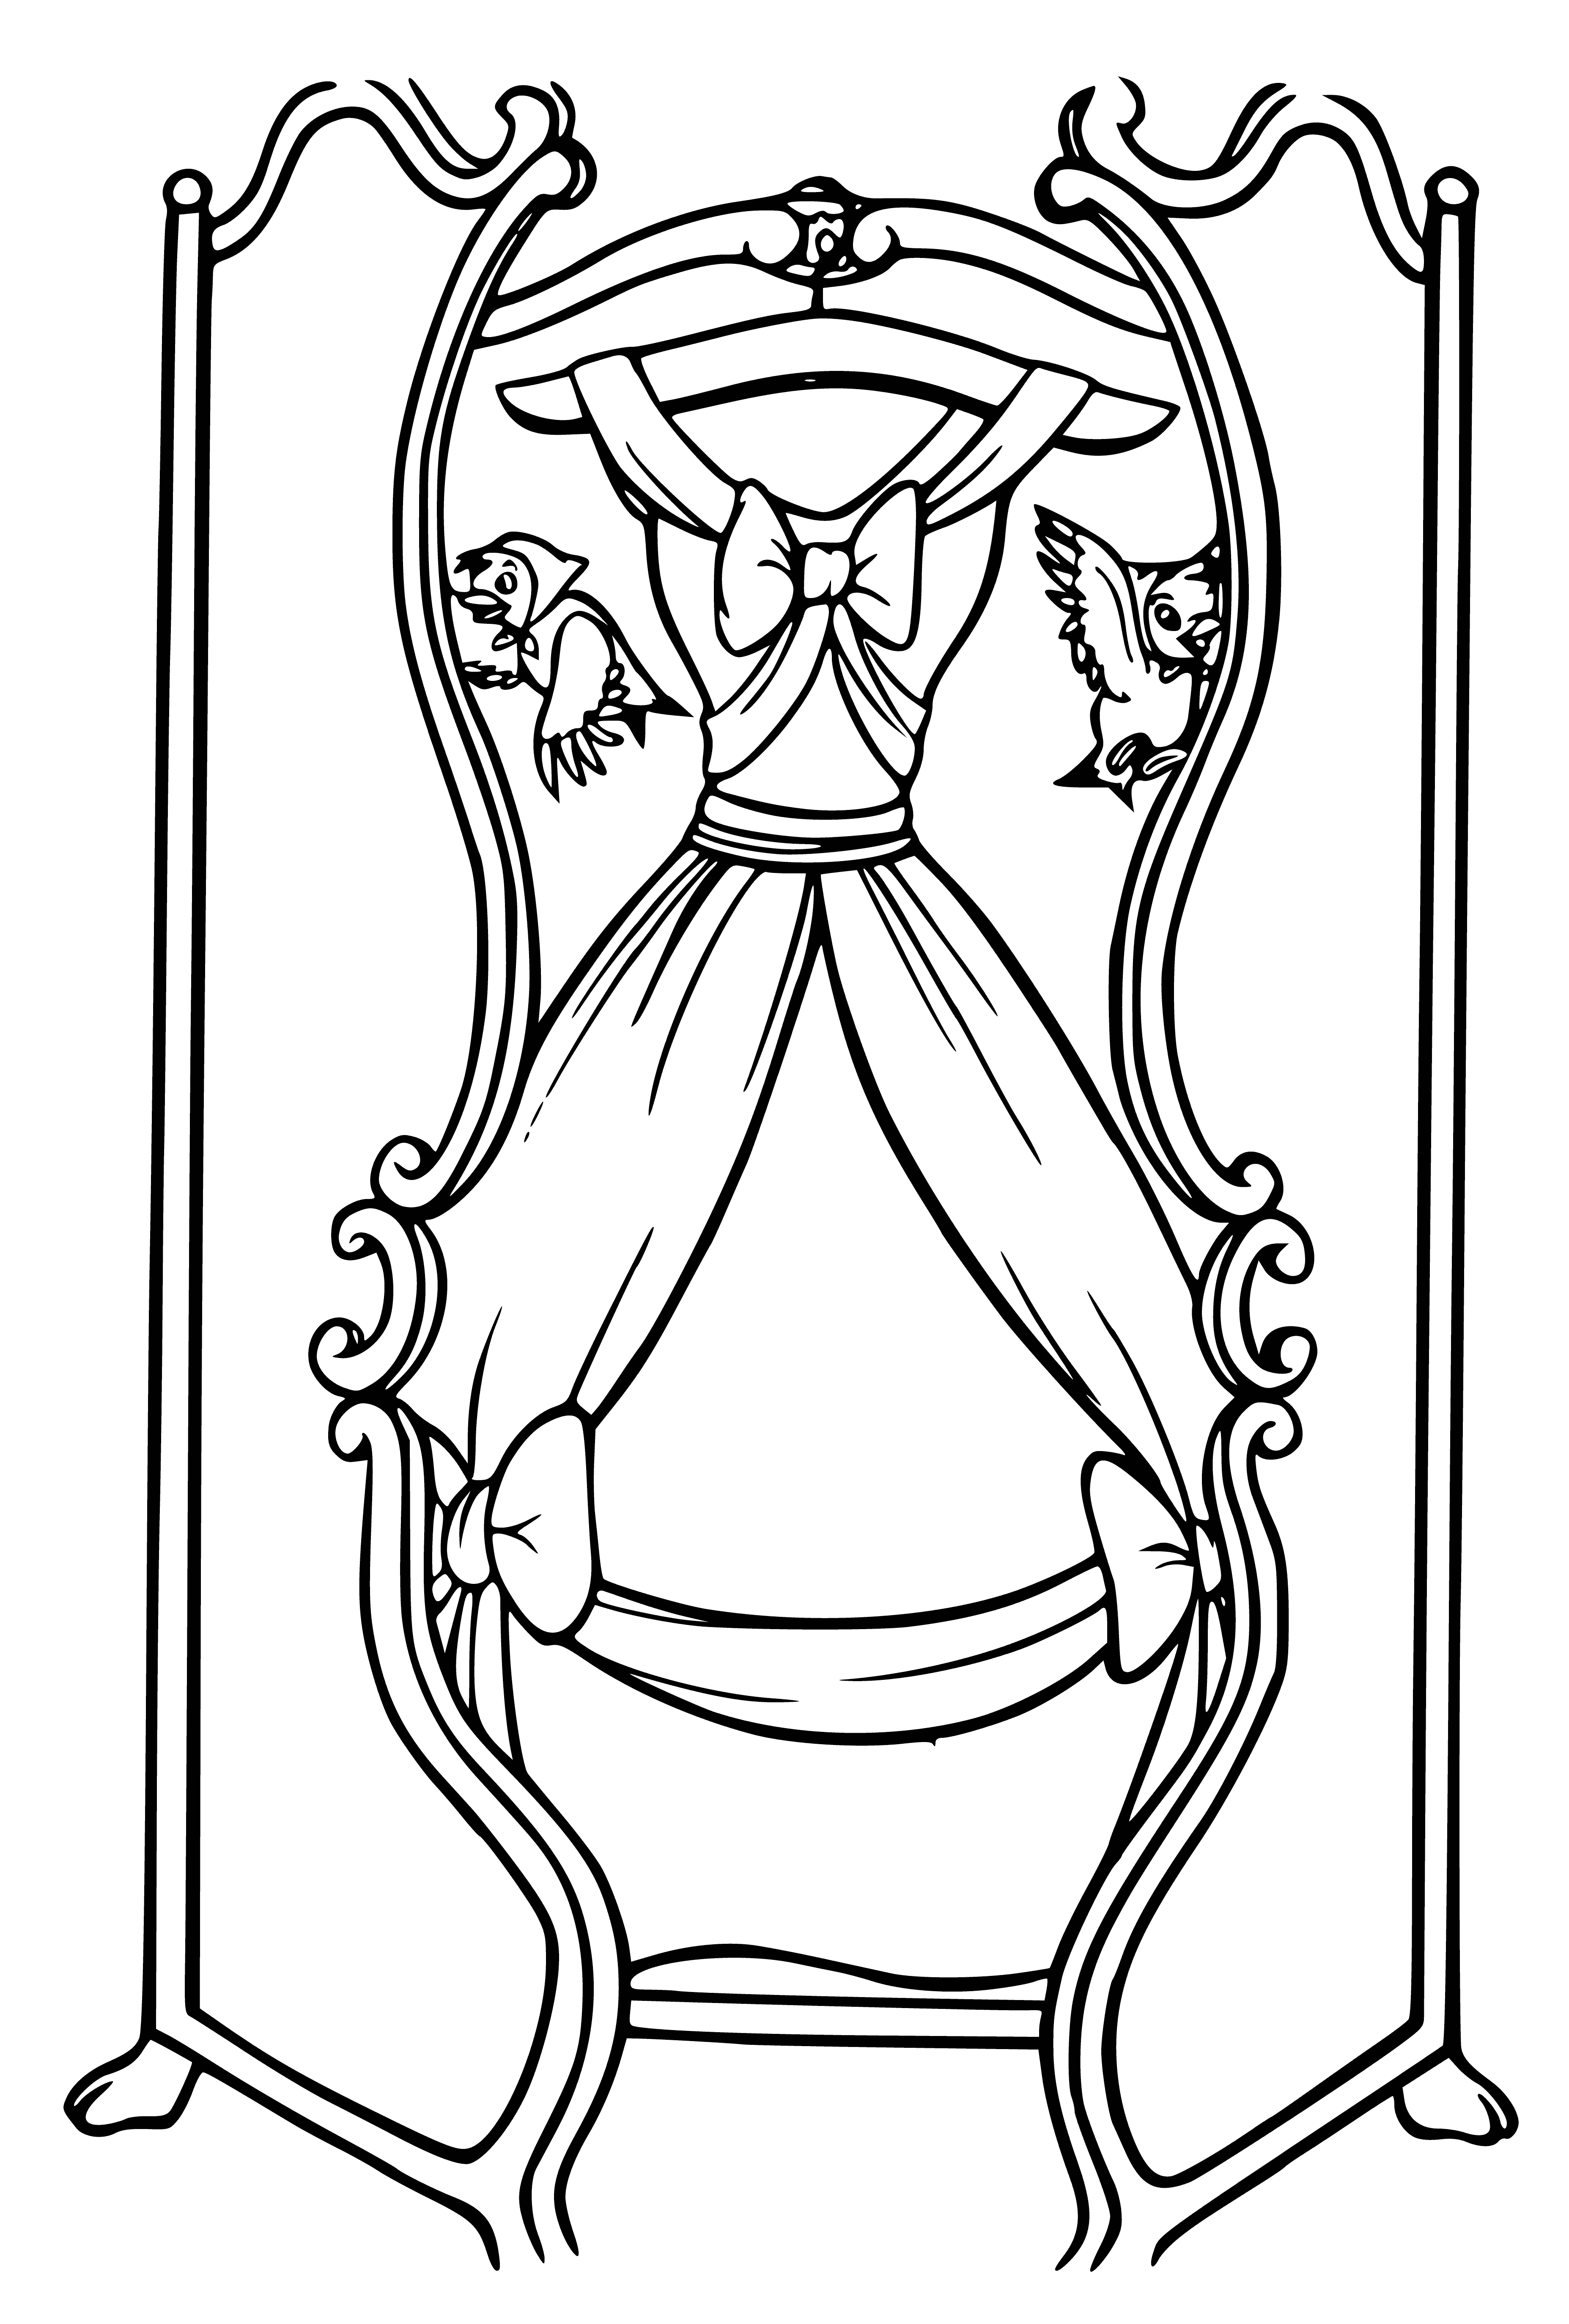 coloring page: A charming dress with a ruffled skirt, sweetheart neckline & low cut back - perfect for any special occasion.